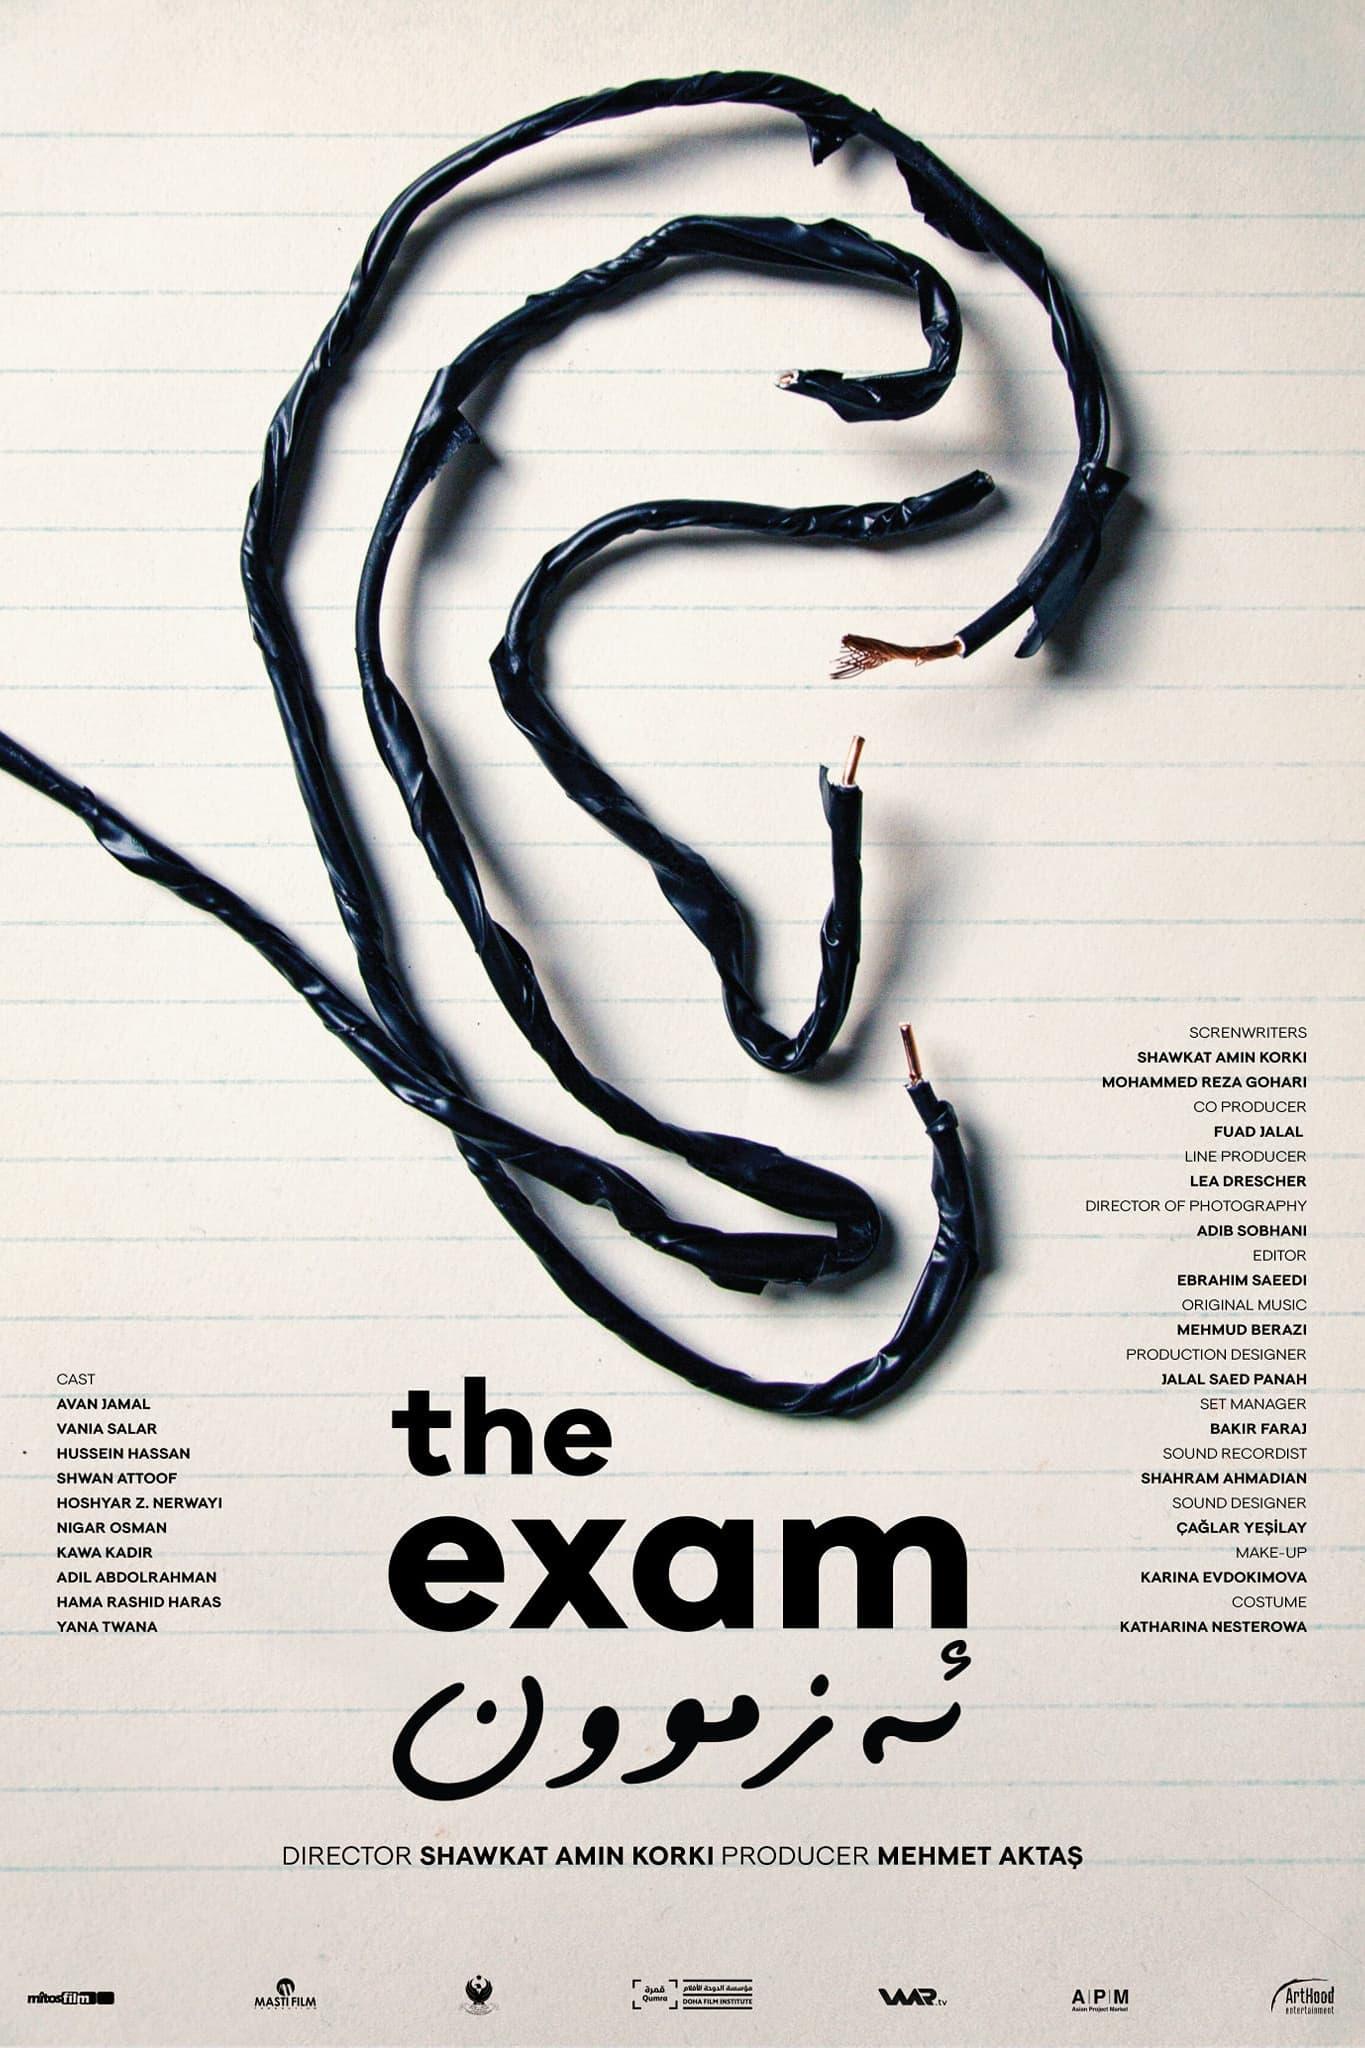 The Exam poster